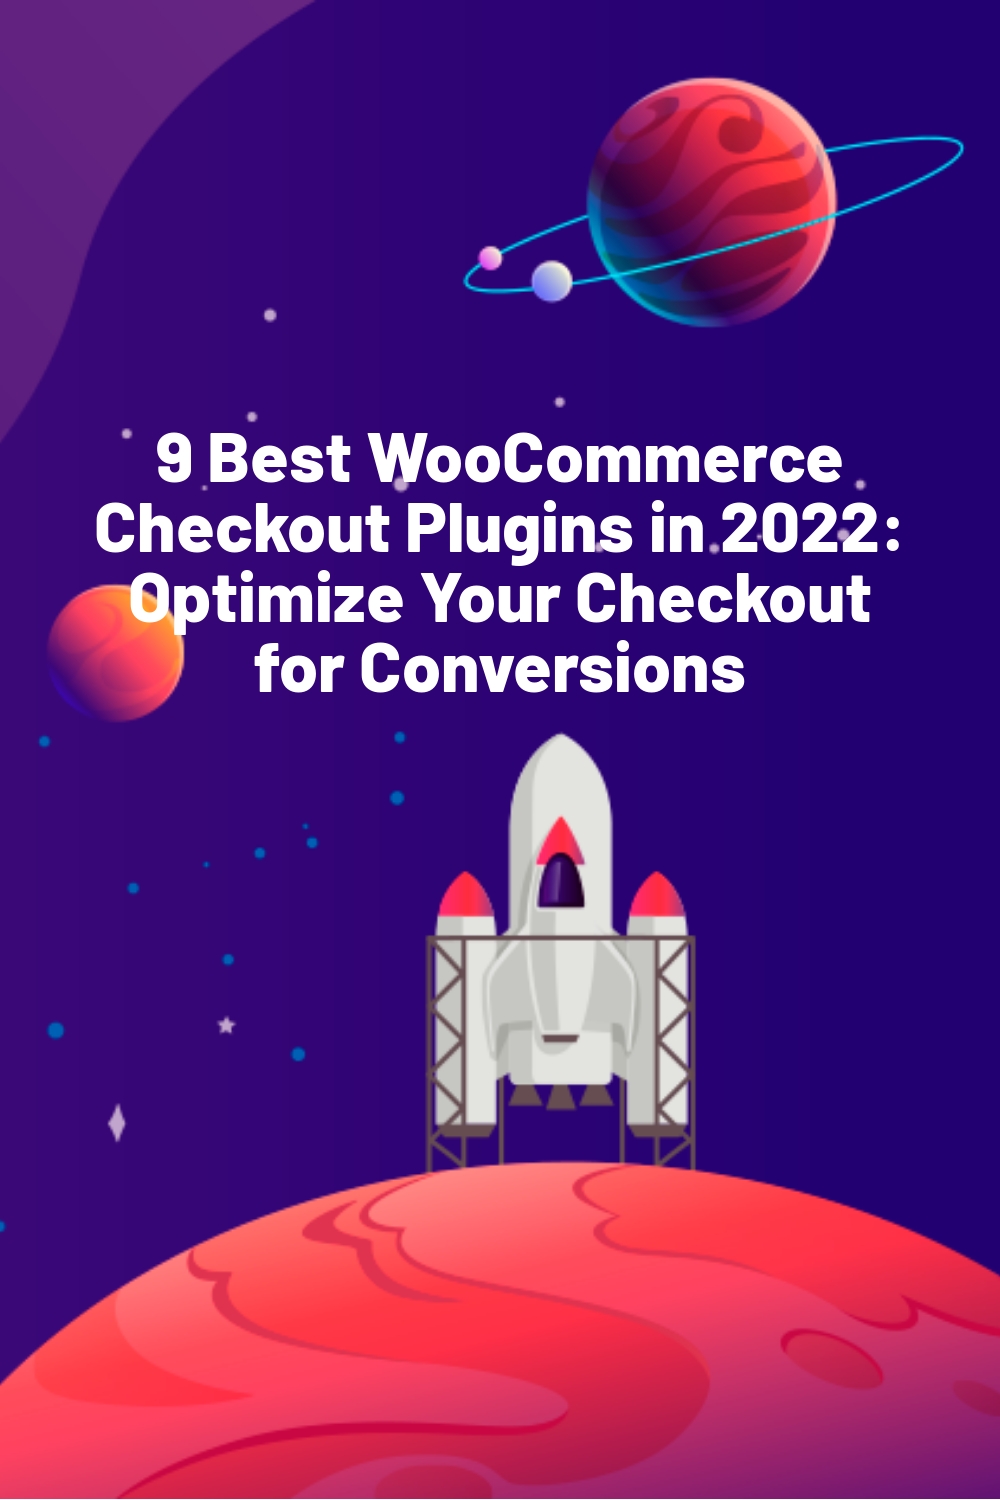 9 Best WooCommerce Checkout Plugins in 2022: Optimize Your Checkout for Conversions